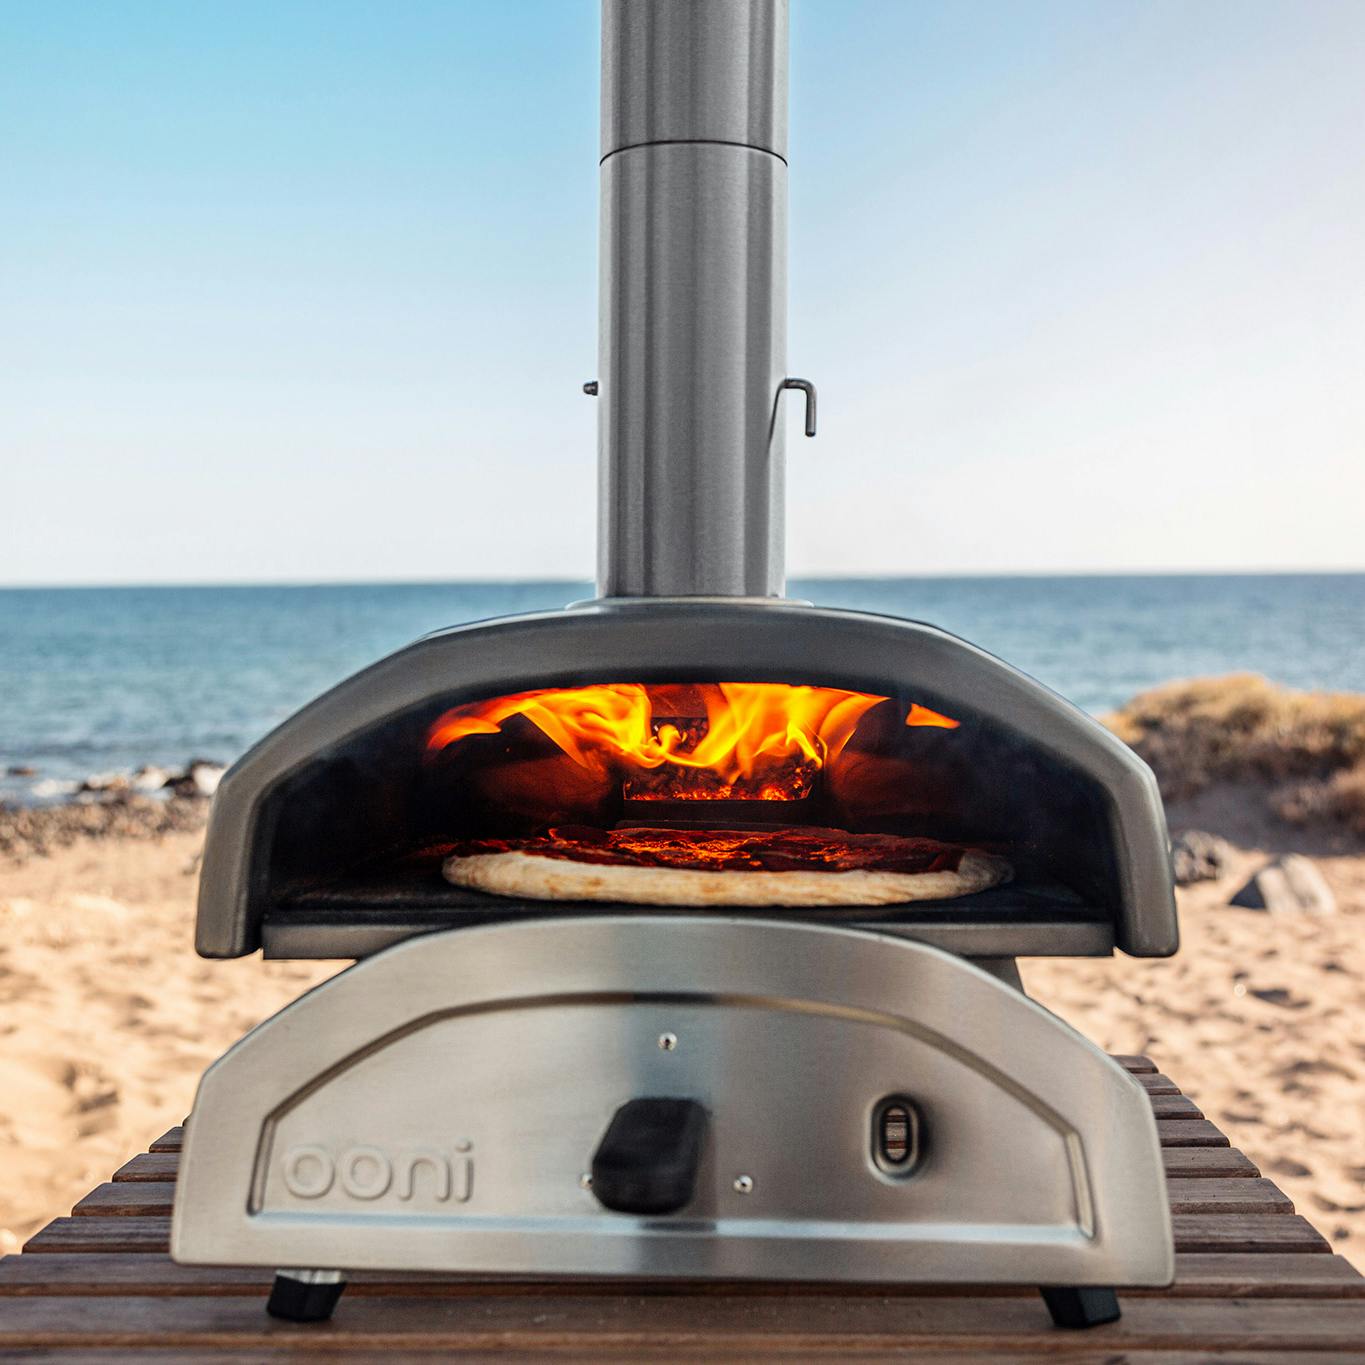 https://huckberry.imgix.net/spree/products/582450/original/FikElYd6Ux_ooni_ooni_frya_portable_wood-fired_outdoor_pizza_oven_gifts_8_original.jpg?auto=format%2C%20compress&crop=top&fit=clip&cs=tinysrgb&ixlib=react-9.5.2